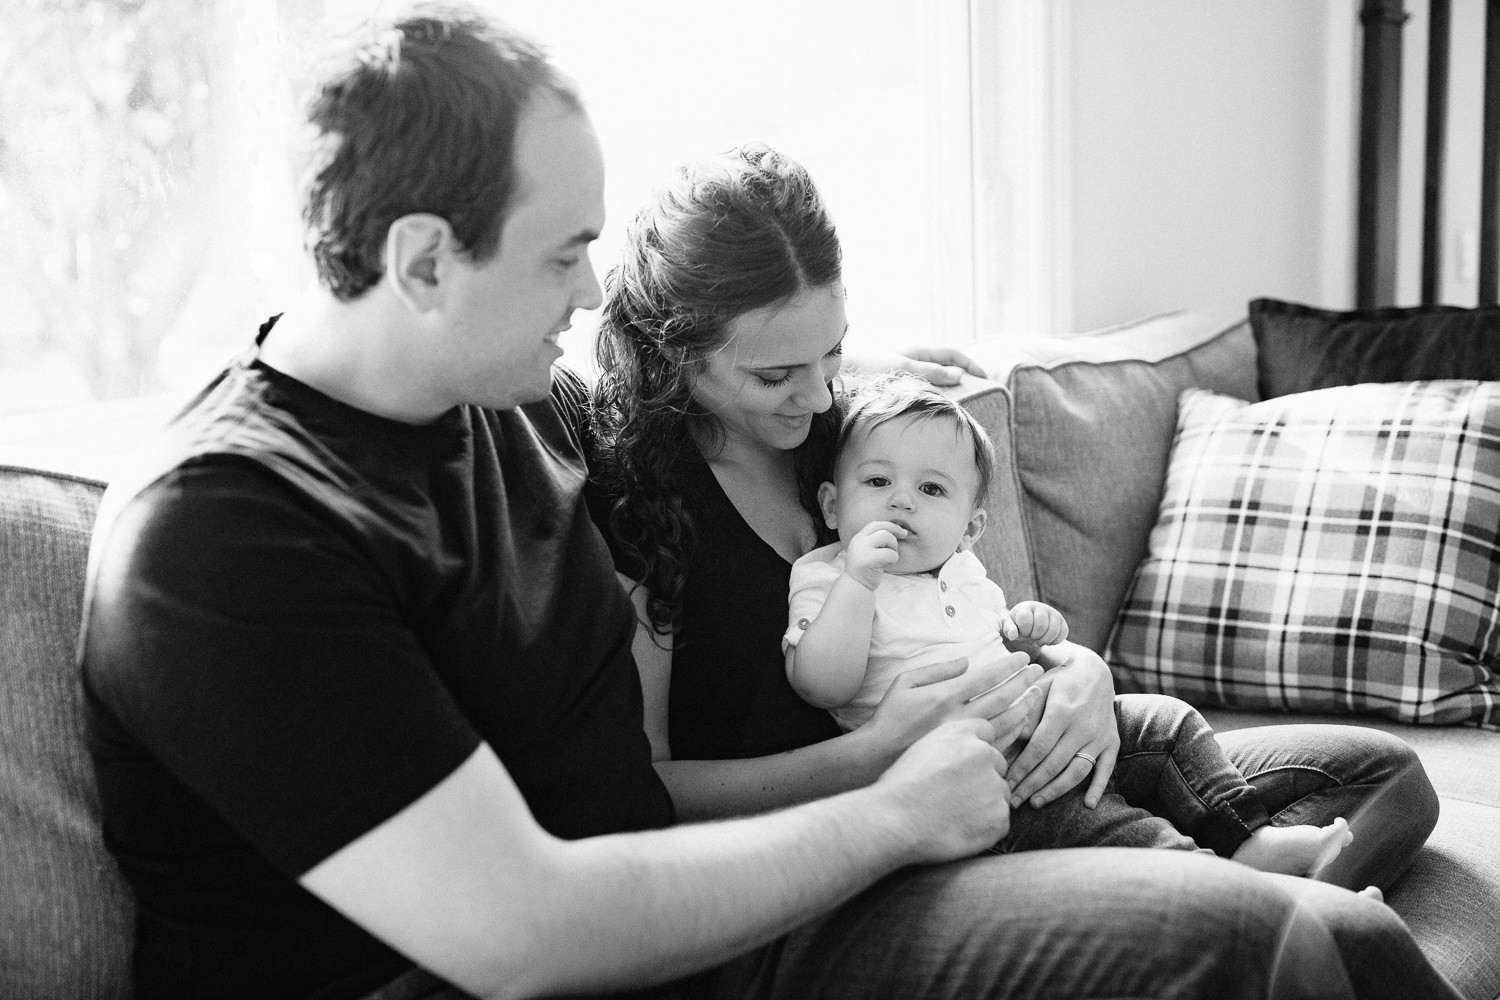 family of 3 sitting on couch, 9 month old baby boy with dark hair sitting on mom's lap looking at camera, parents smiling at son - Markham Golden Hour Photography